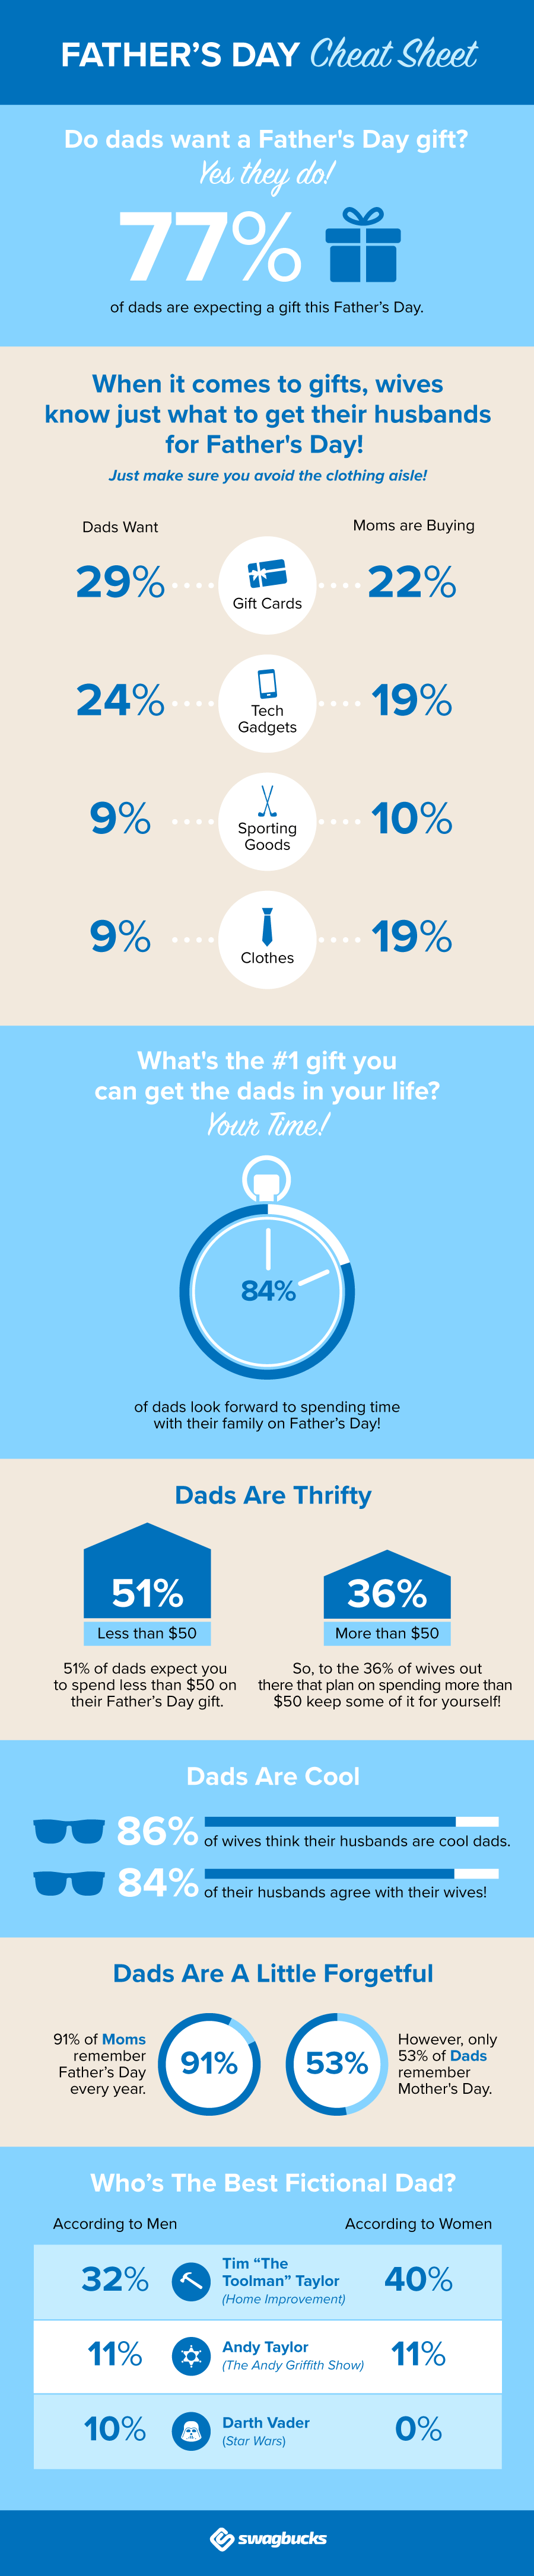 PRT-3399-fathers-day-info-graphic-v2-1 (1)